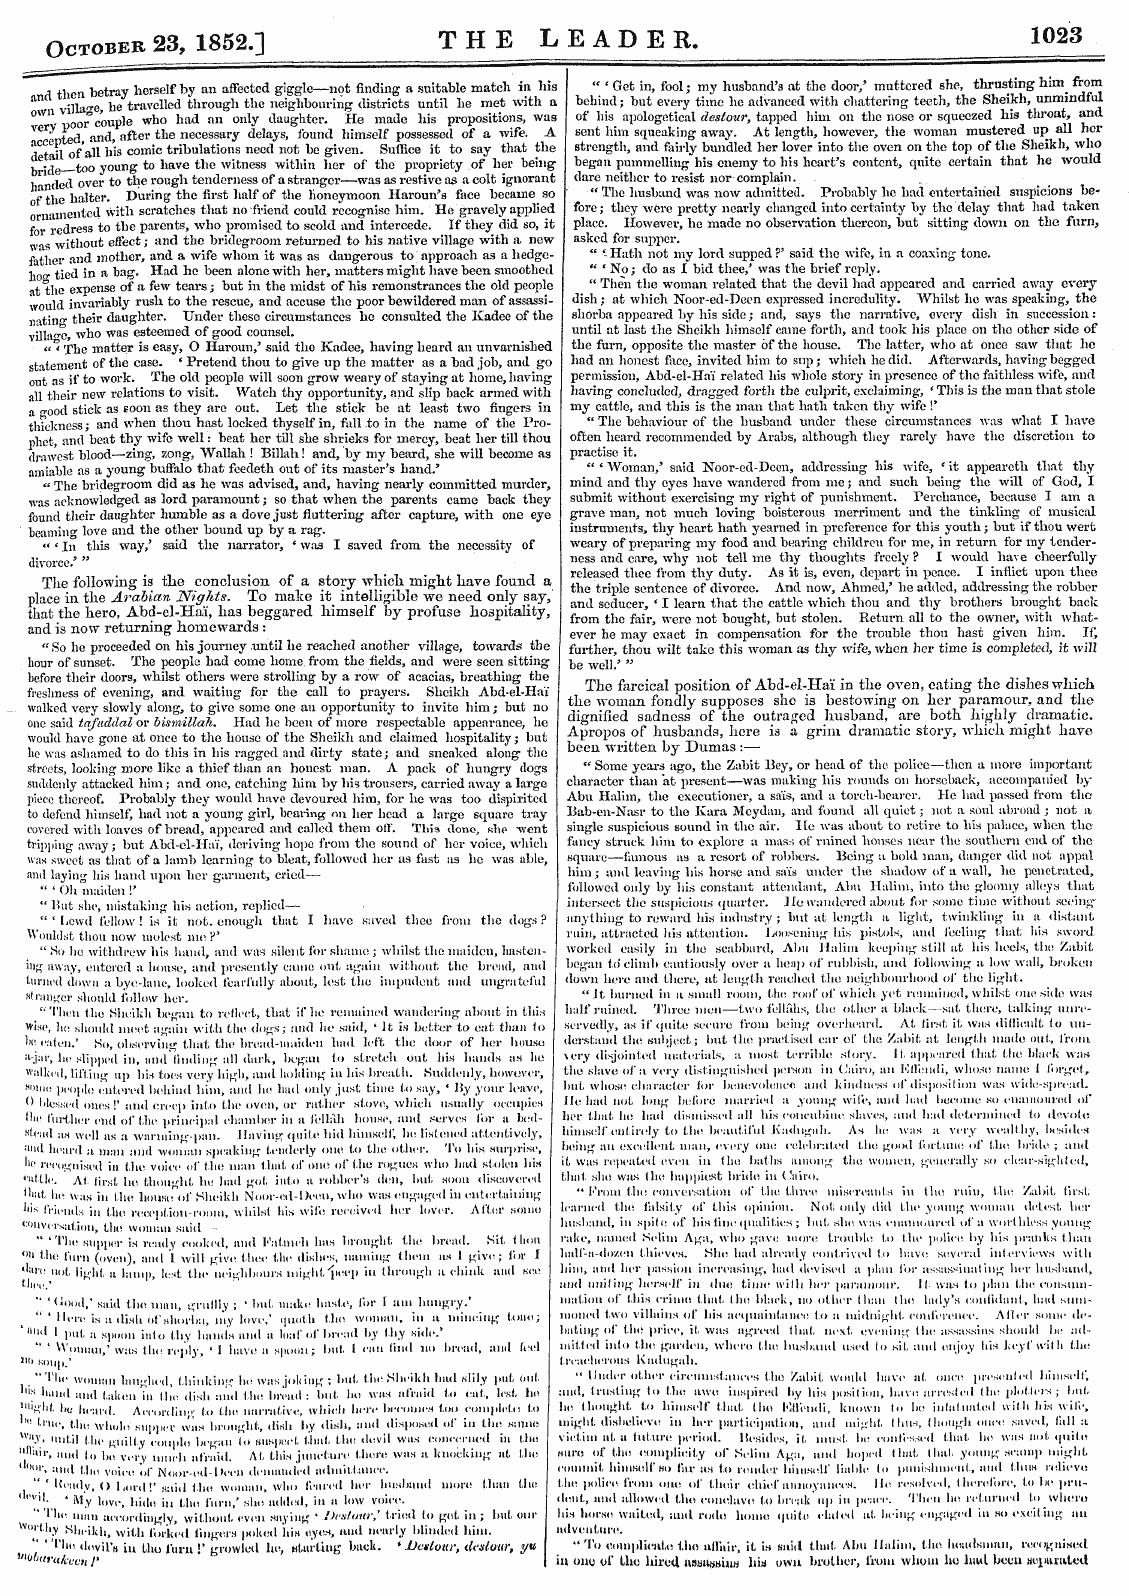 Leader (1850-1860): jS F Y, Country edition - October 23, 1852.] The Leader. 1023